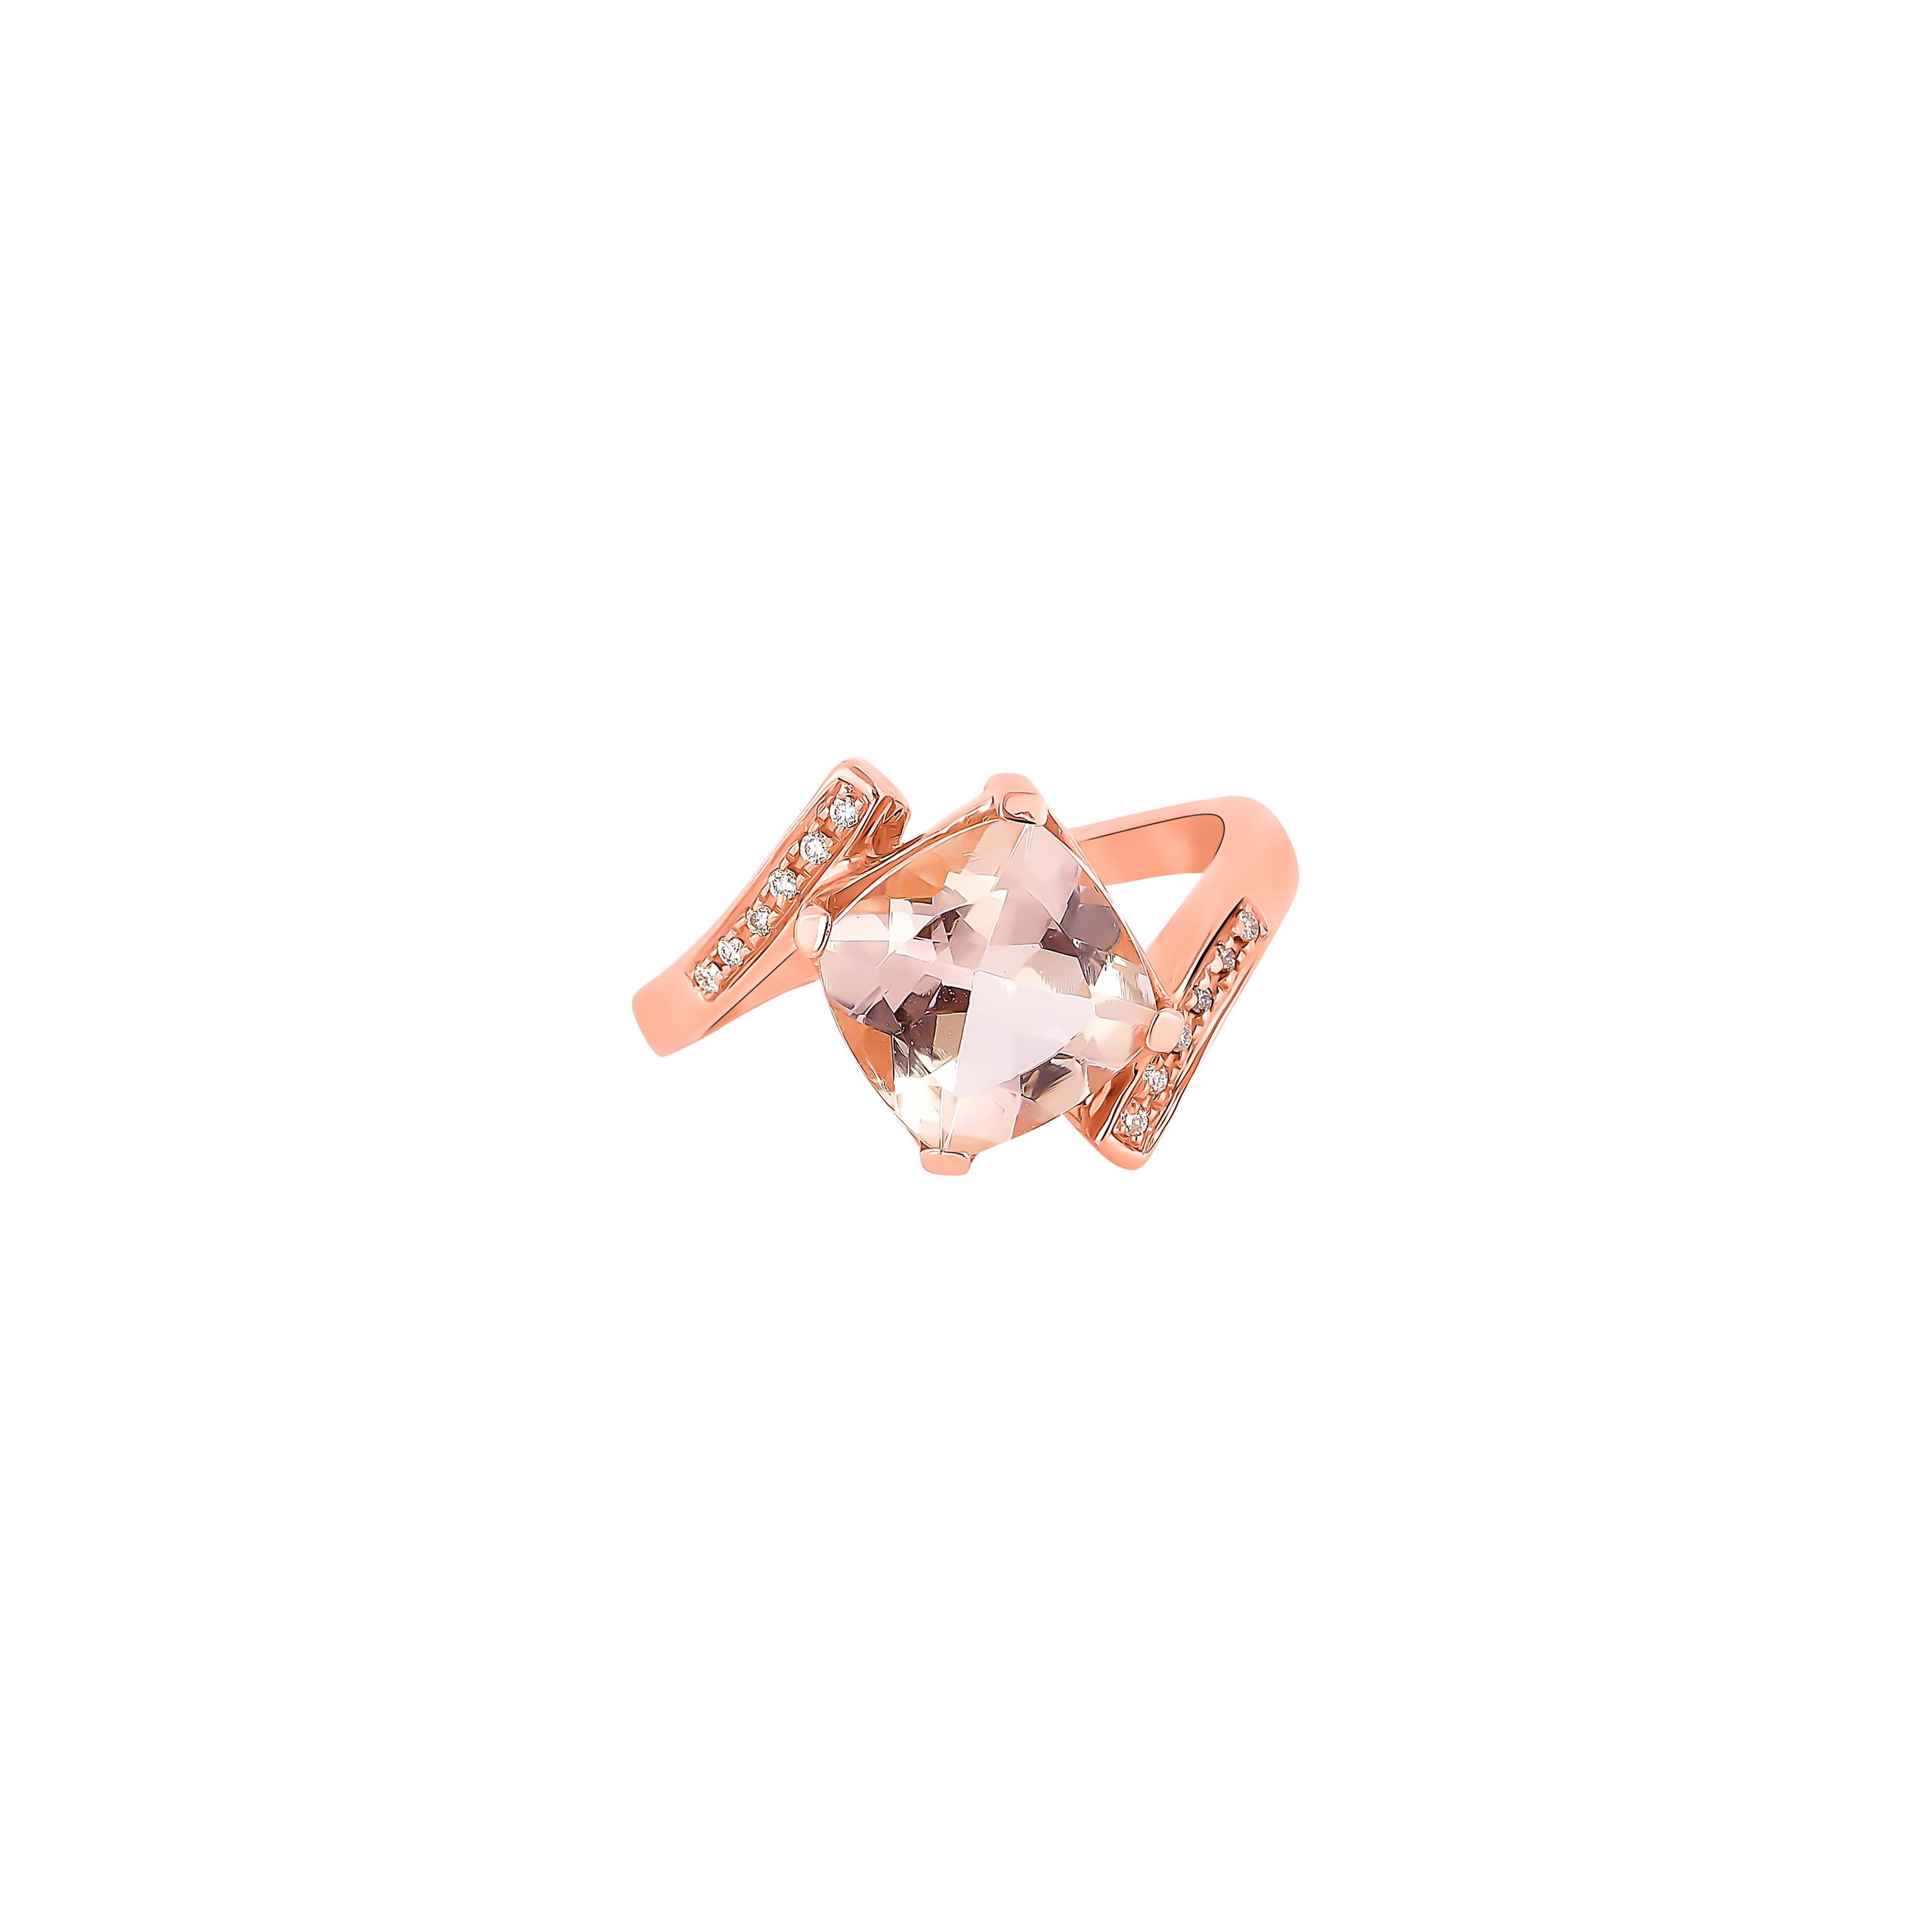 Contemporary 2.7 Carat Morganite and Diamond Ring in 18 Karat Rose Gold For Sale